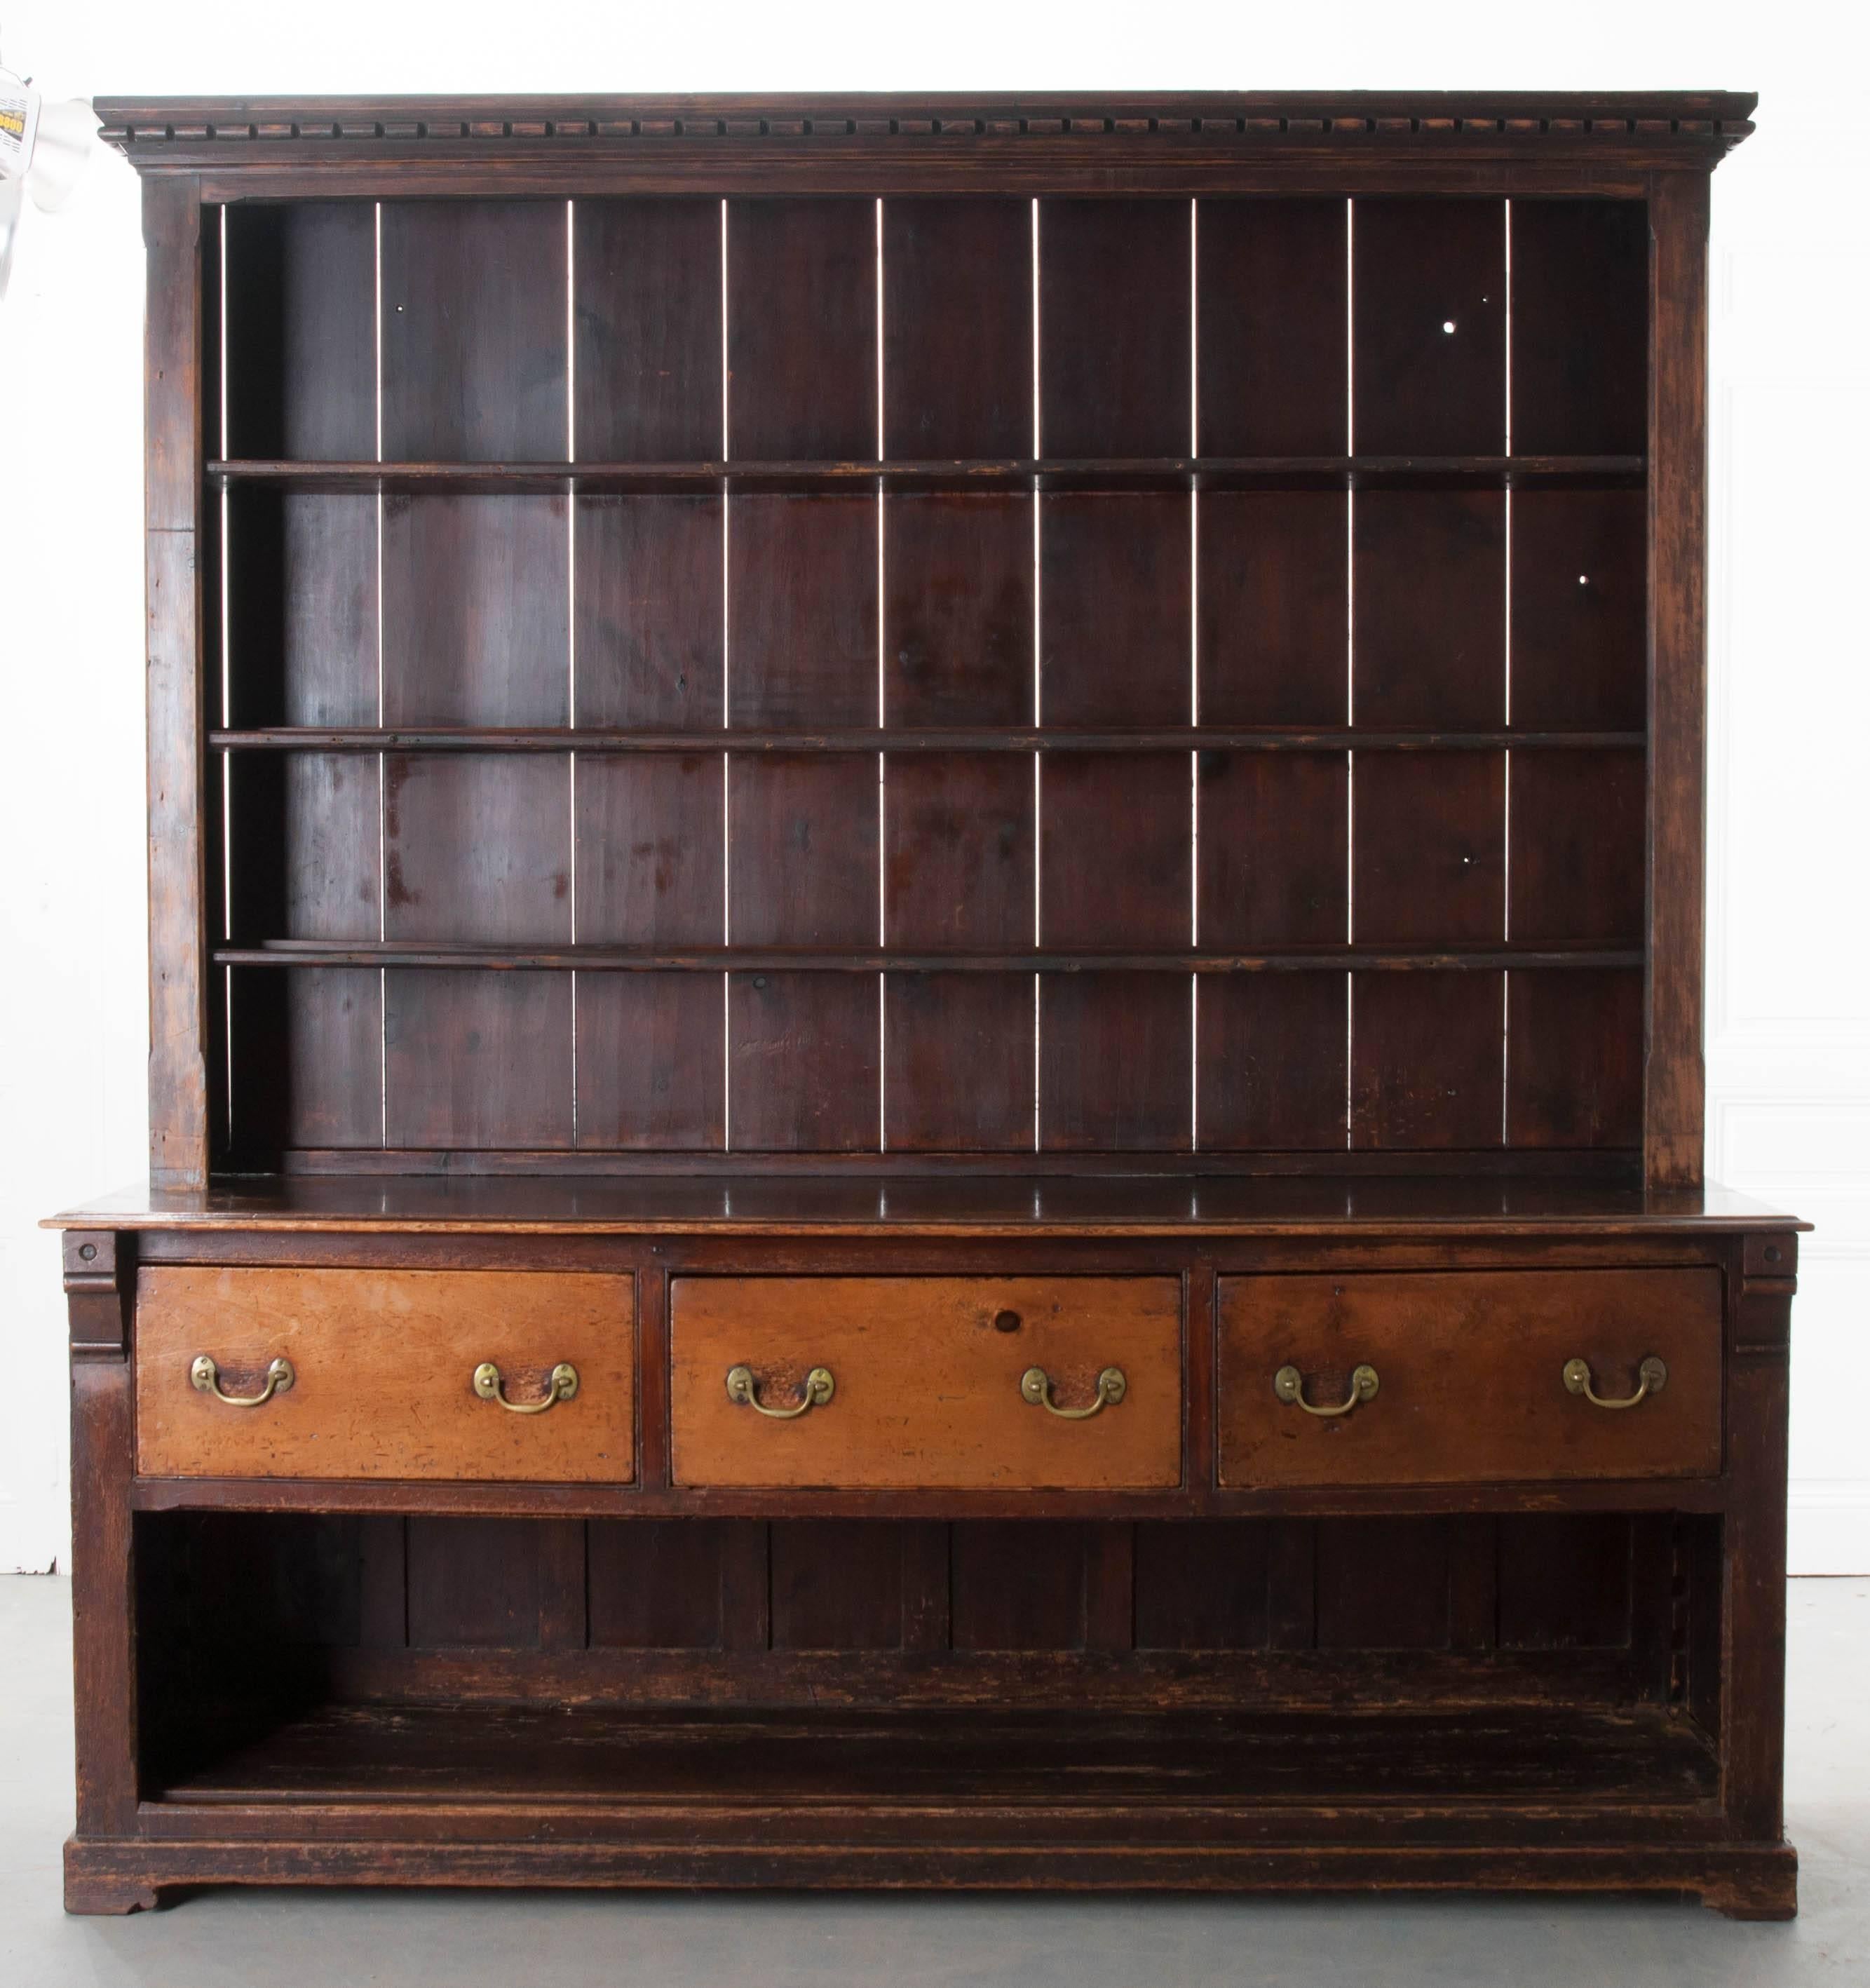 A commanding pine dresser with pot board from the early part of the 19th century, England. Display your china and decorative objects on one of the three adjustable shelves. The molded cornice features a dentil motif with rounded edges. The dark pine